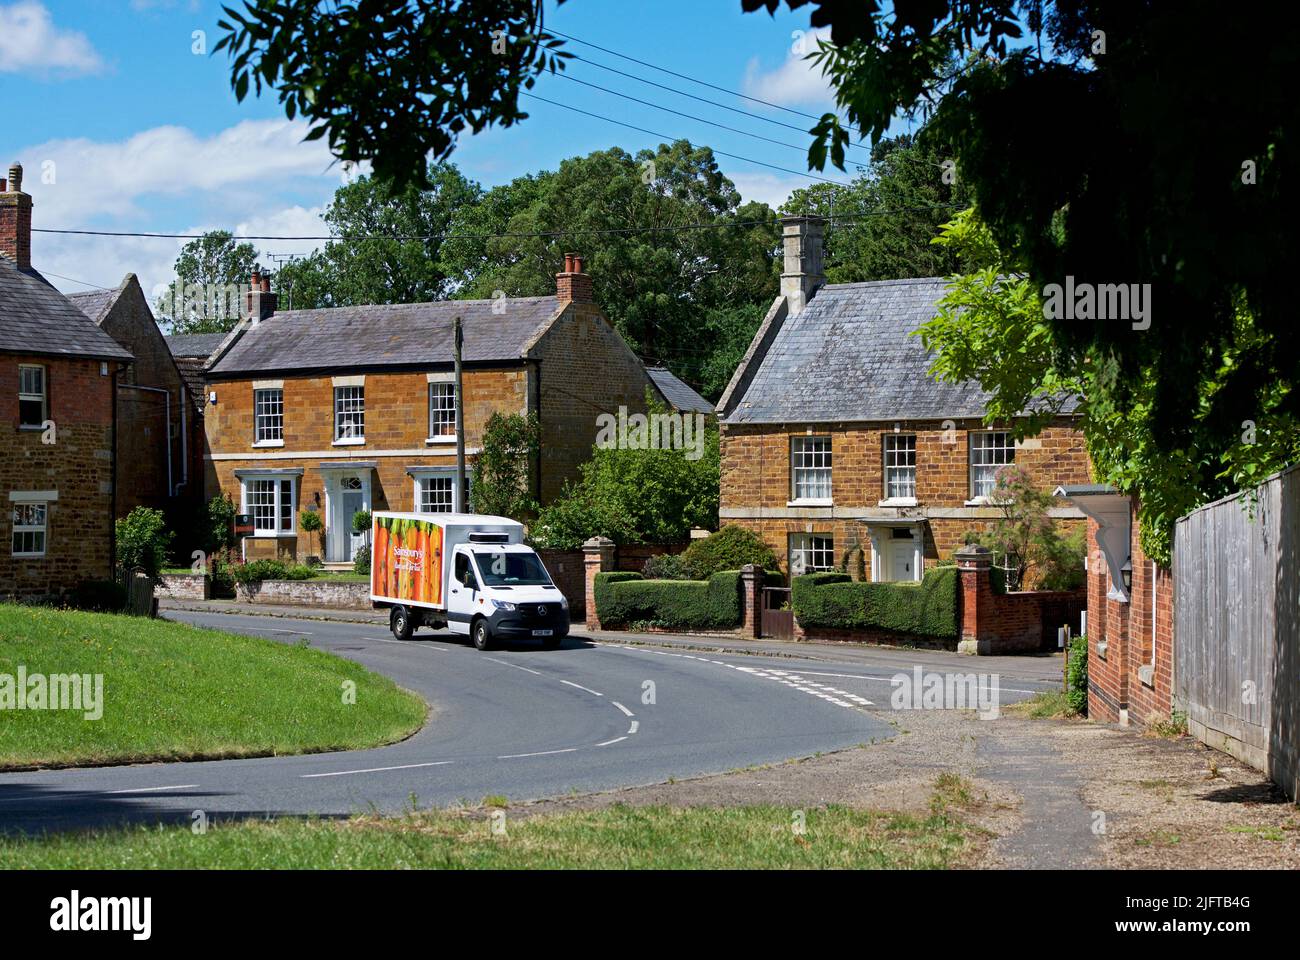 Sainsbury's delivery van in the village of Weston by Welland, Northamptonshire, England UK Stock Photo